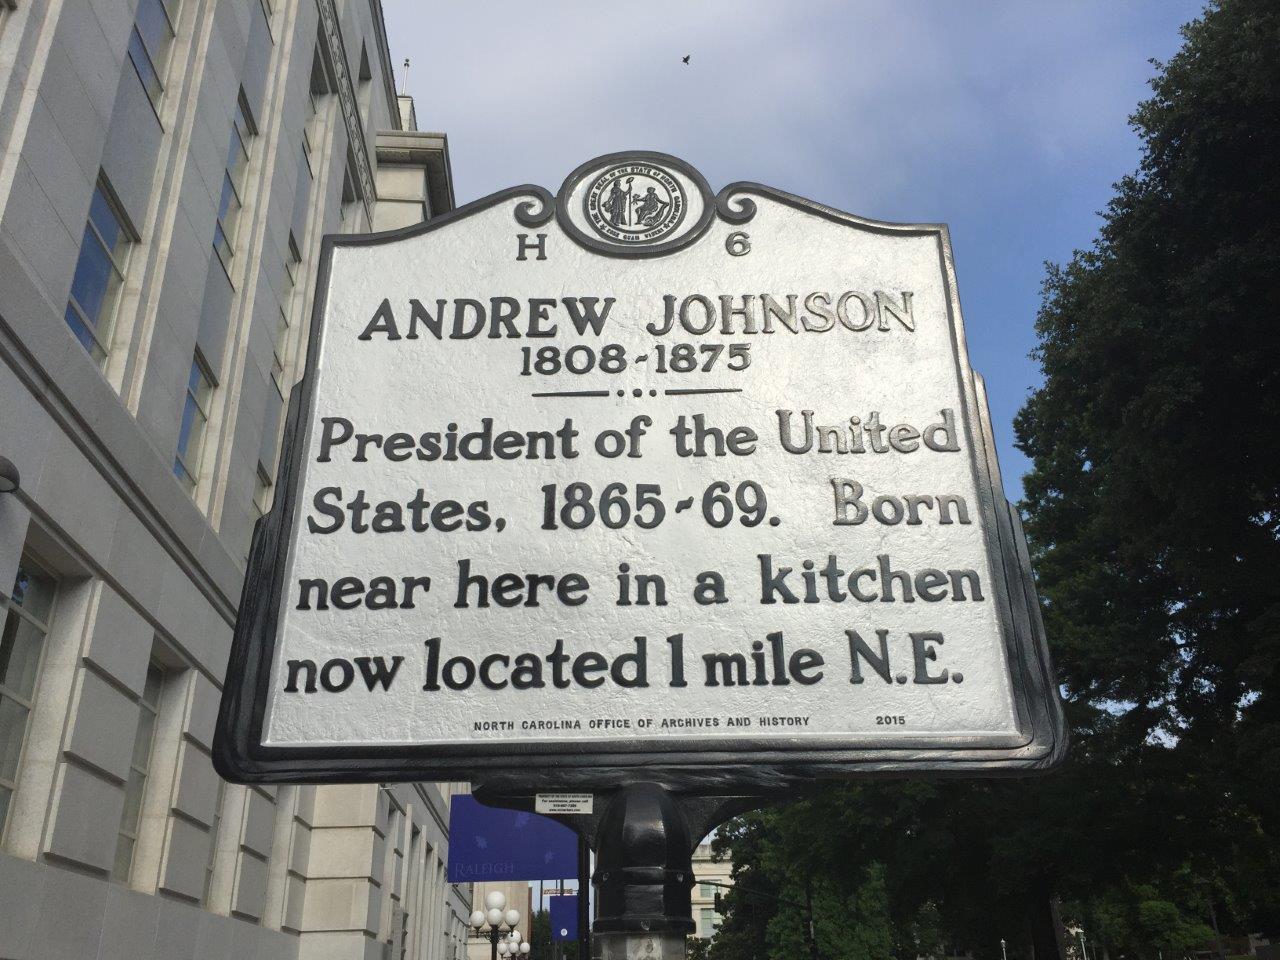 Andrew Johnson birthplace historical marker